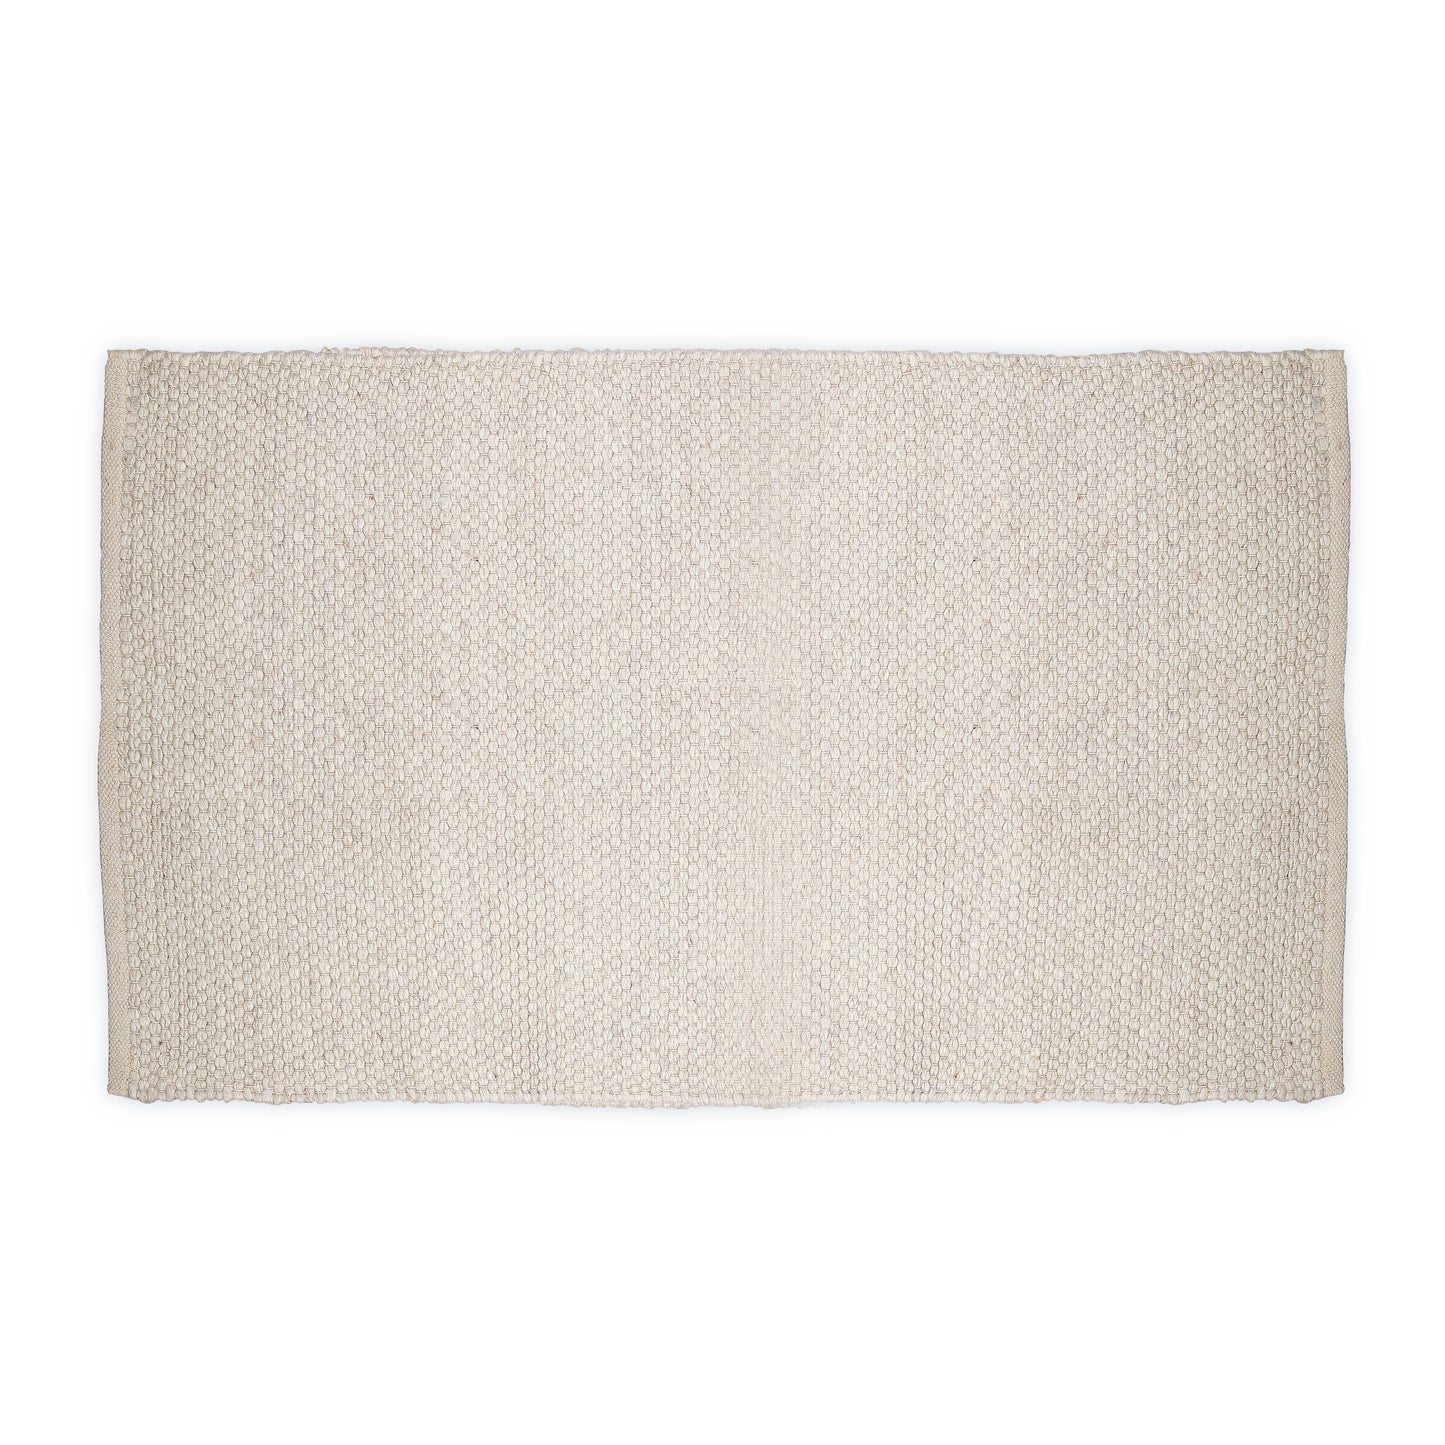 Hand Woven Wool Area Rug Woven Solid Off White  1244